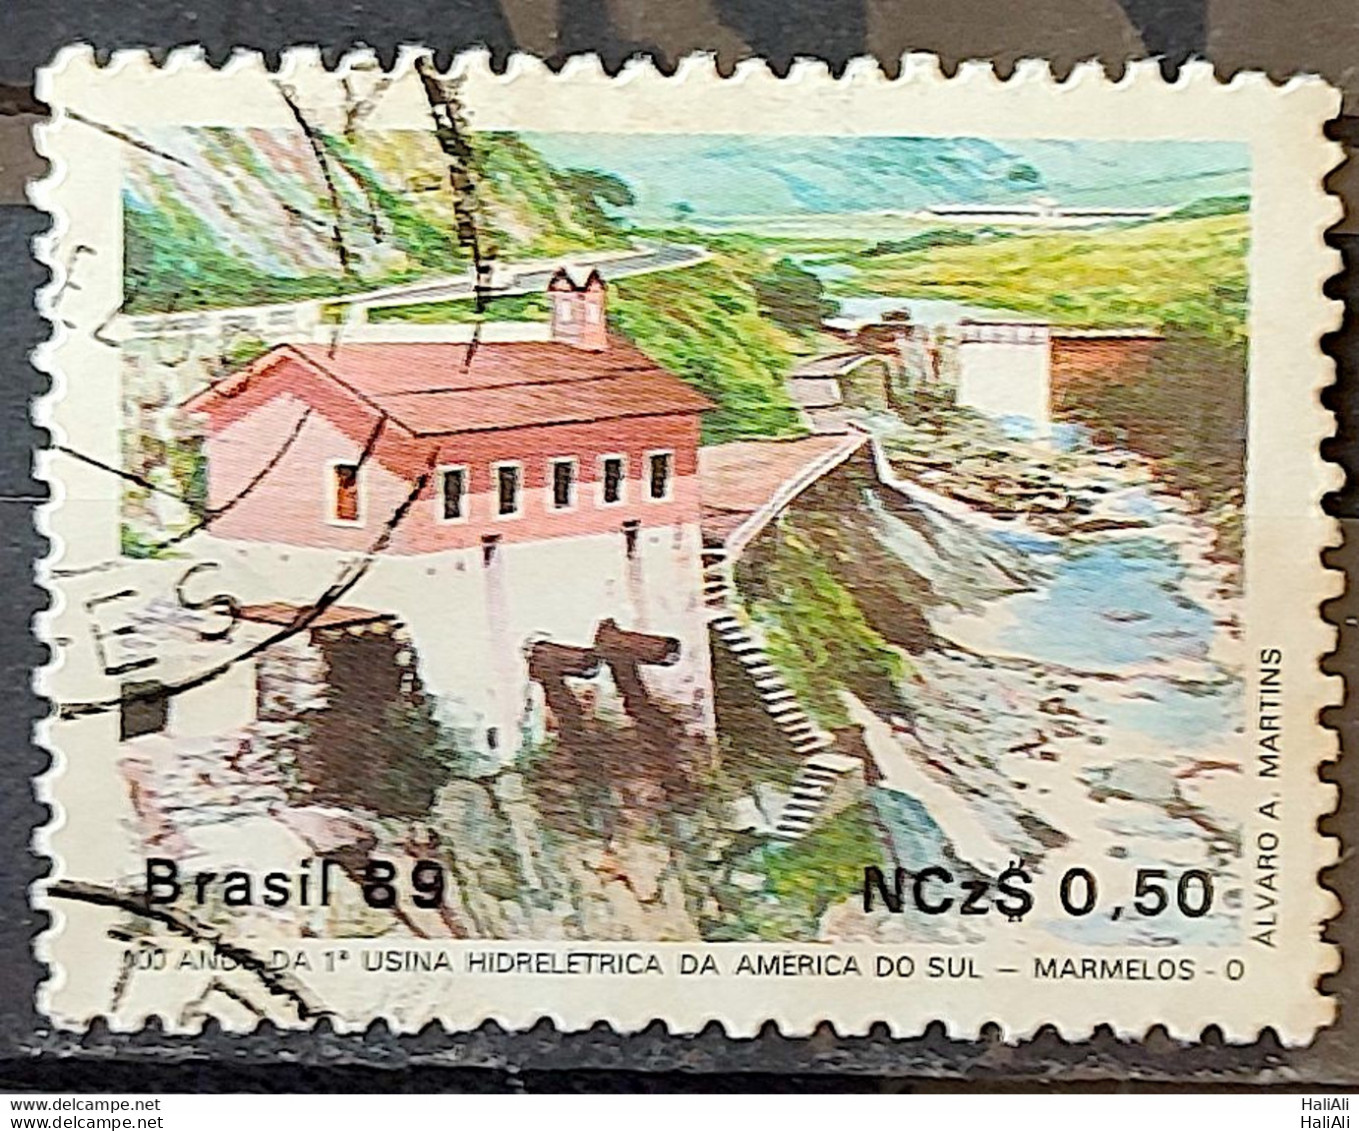 C 1644 Brazil Stamp 100 Years Hydroelectric Marmelos Energy Electricity Juiz De Fora 1989 Circulated 13 - Used Stamps